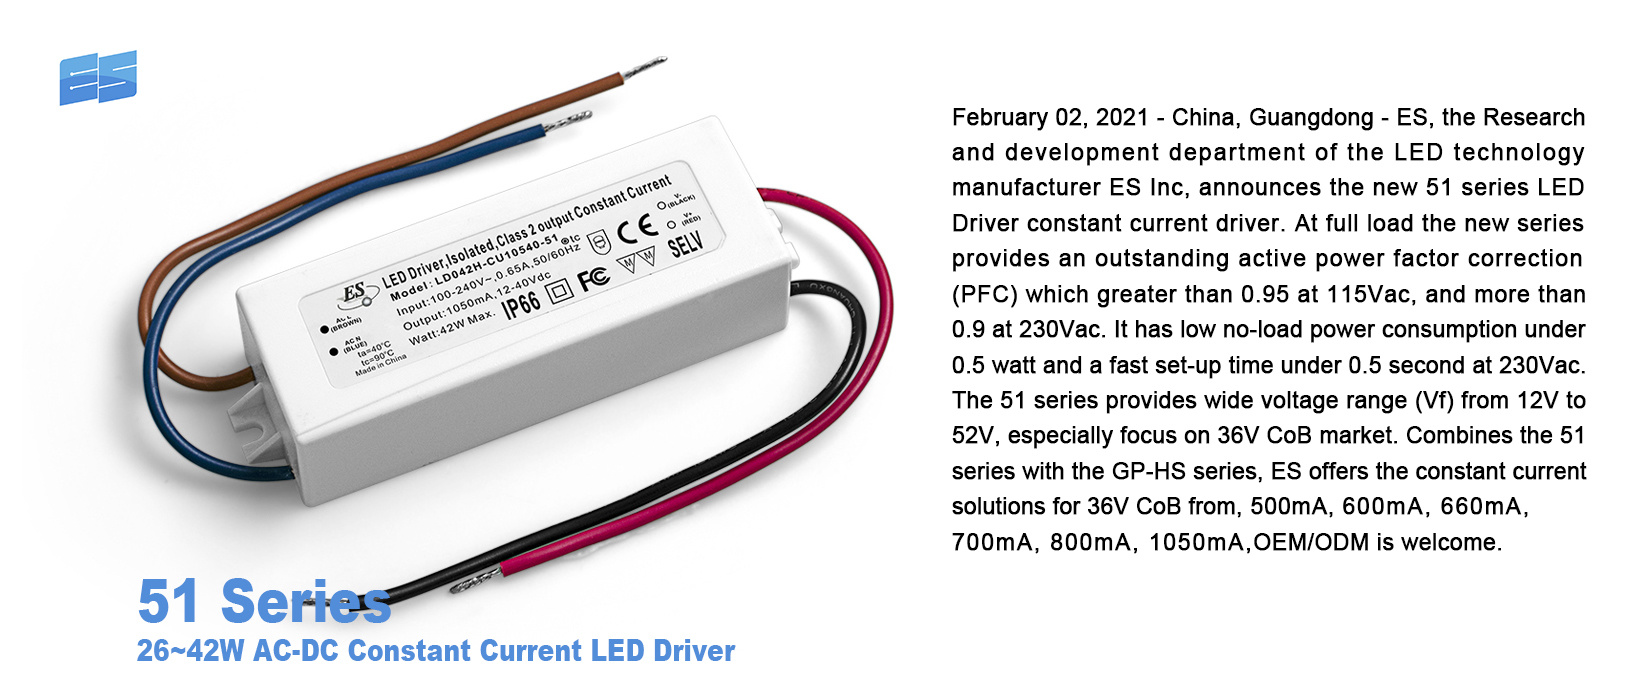 ES Launches 51 Series LED Constant Current LED Driver which focus on the 36V CoB market